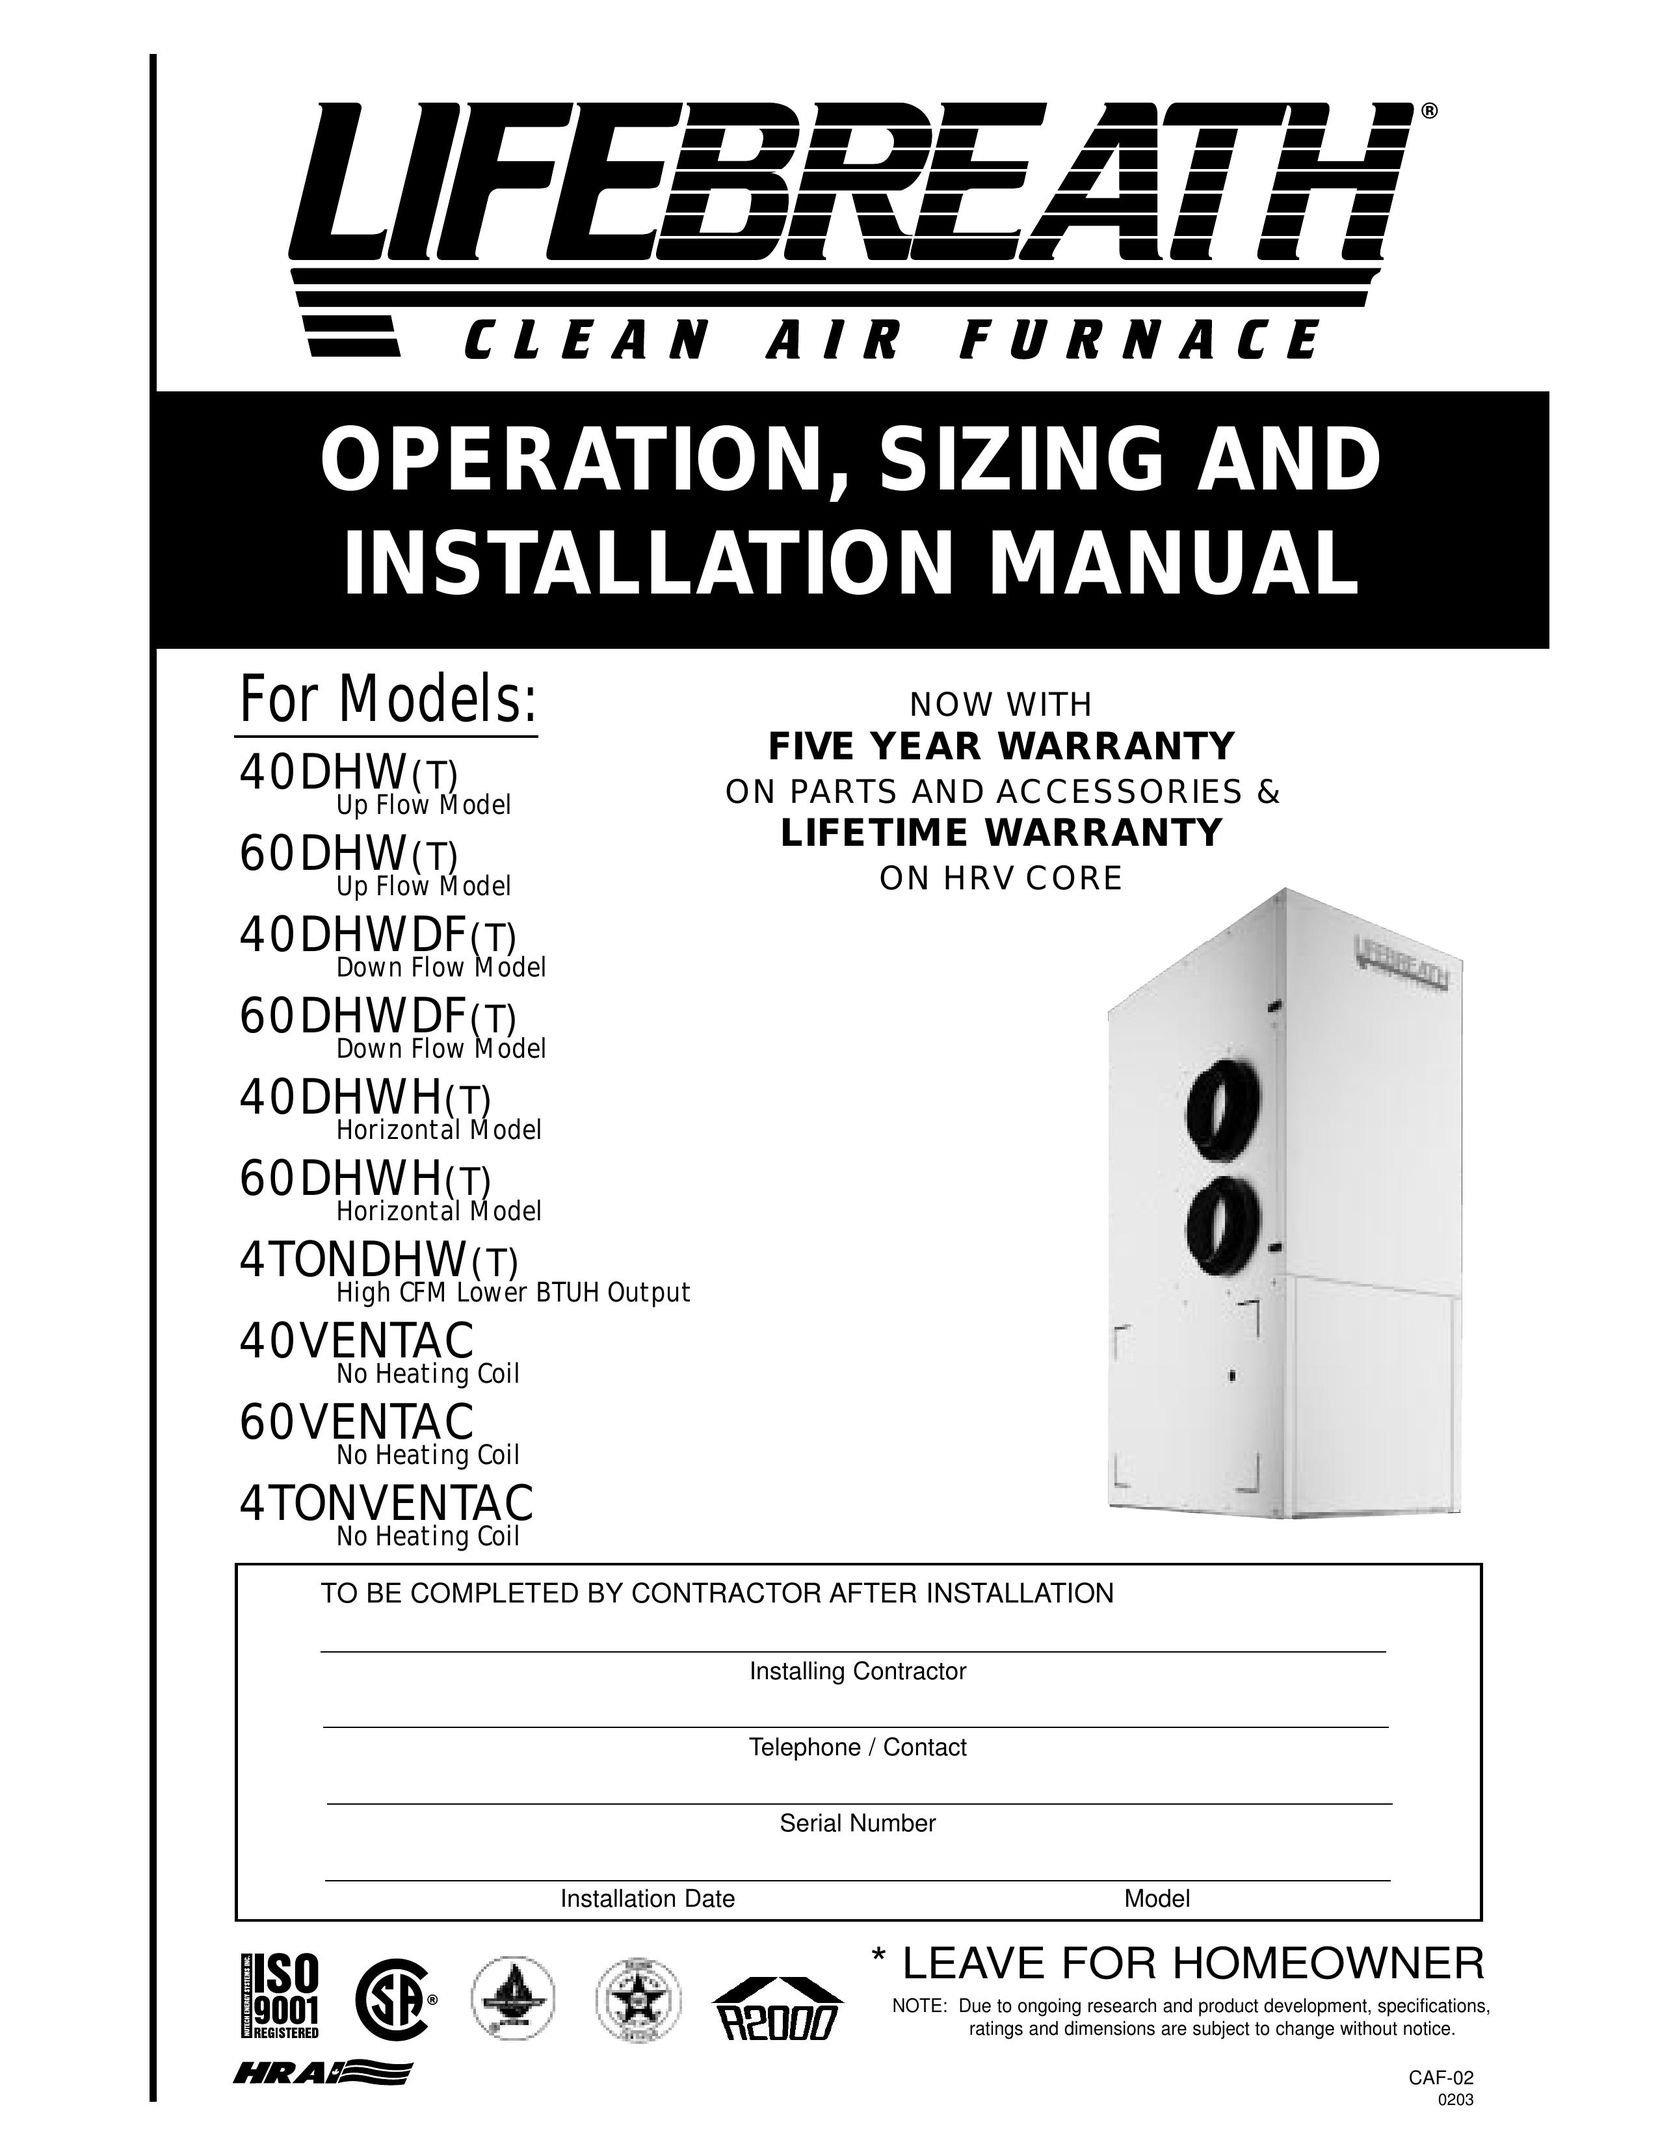 Lifebreath 60DHW(T) Thermostat User Manual